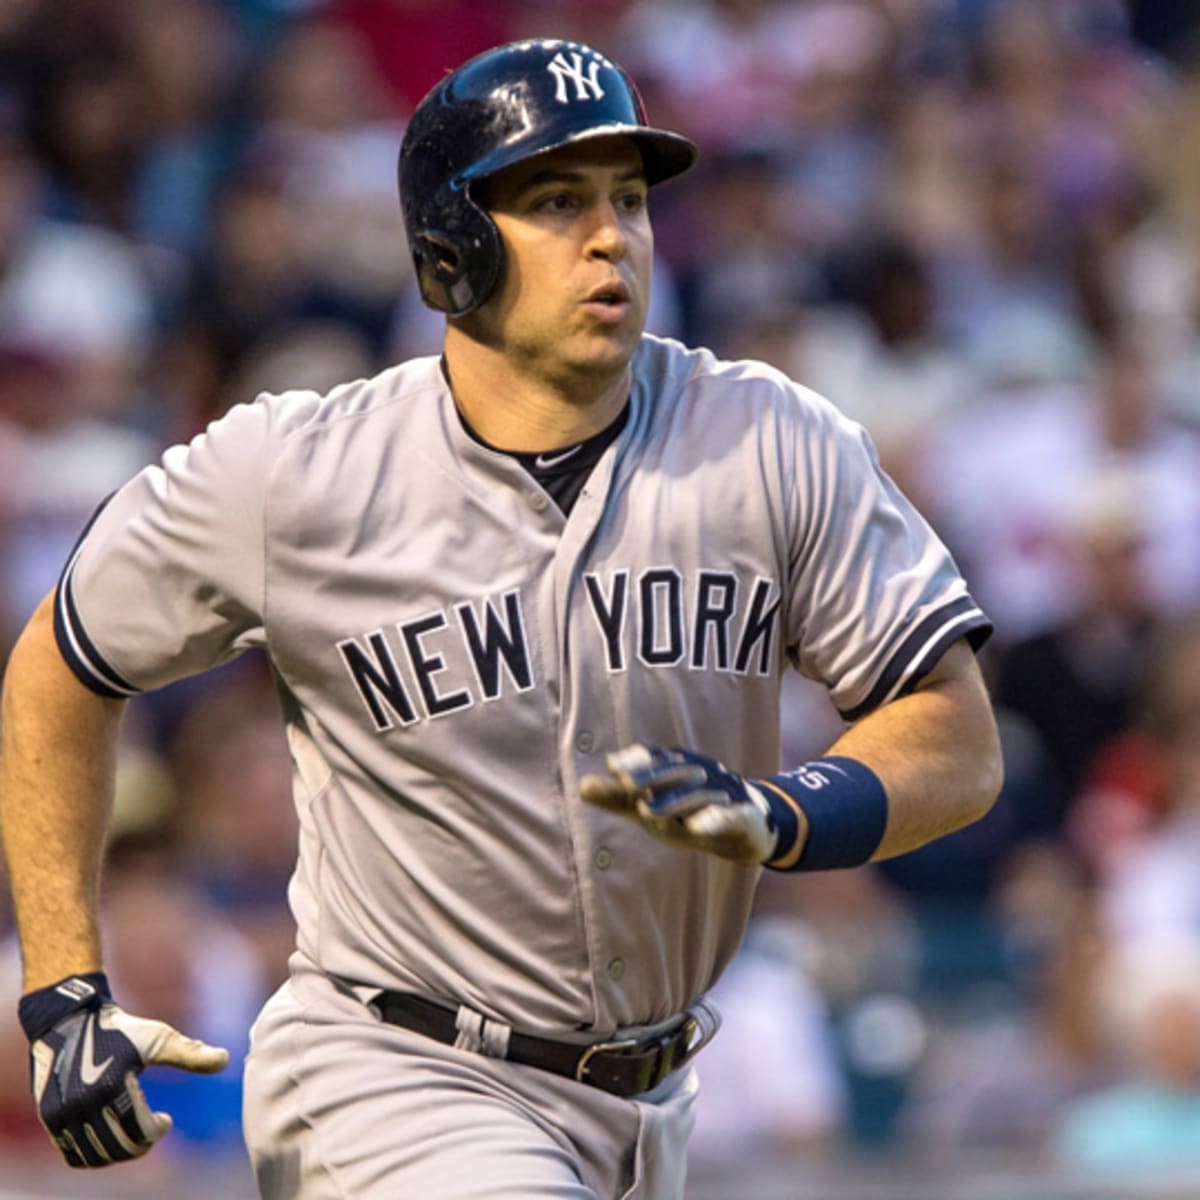 What is Mark Teixeira's New York Yankees legacy?